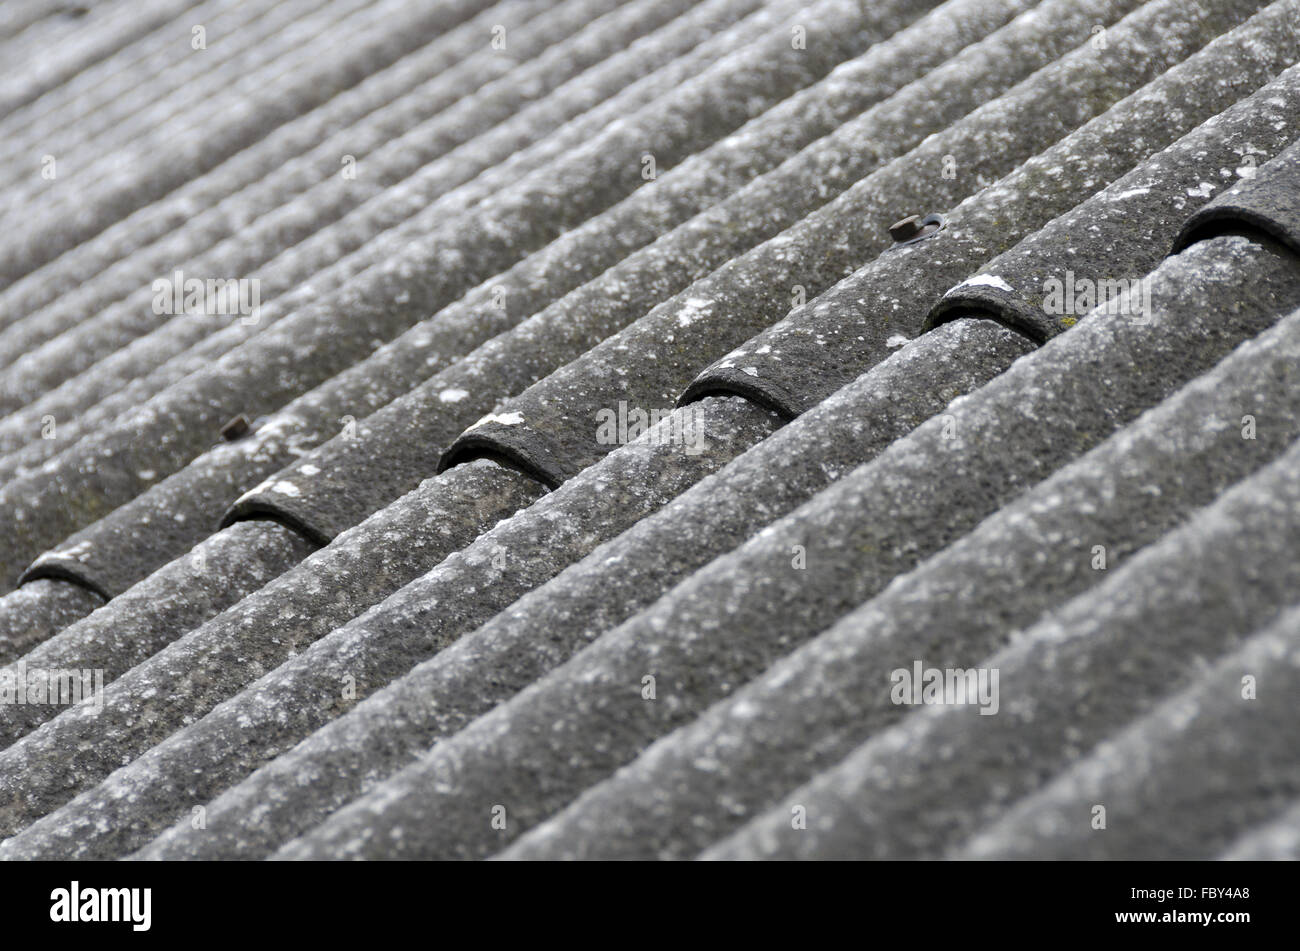 waved asbestos-cement sheets Stock Photo